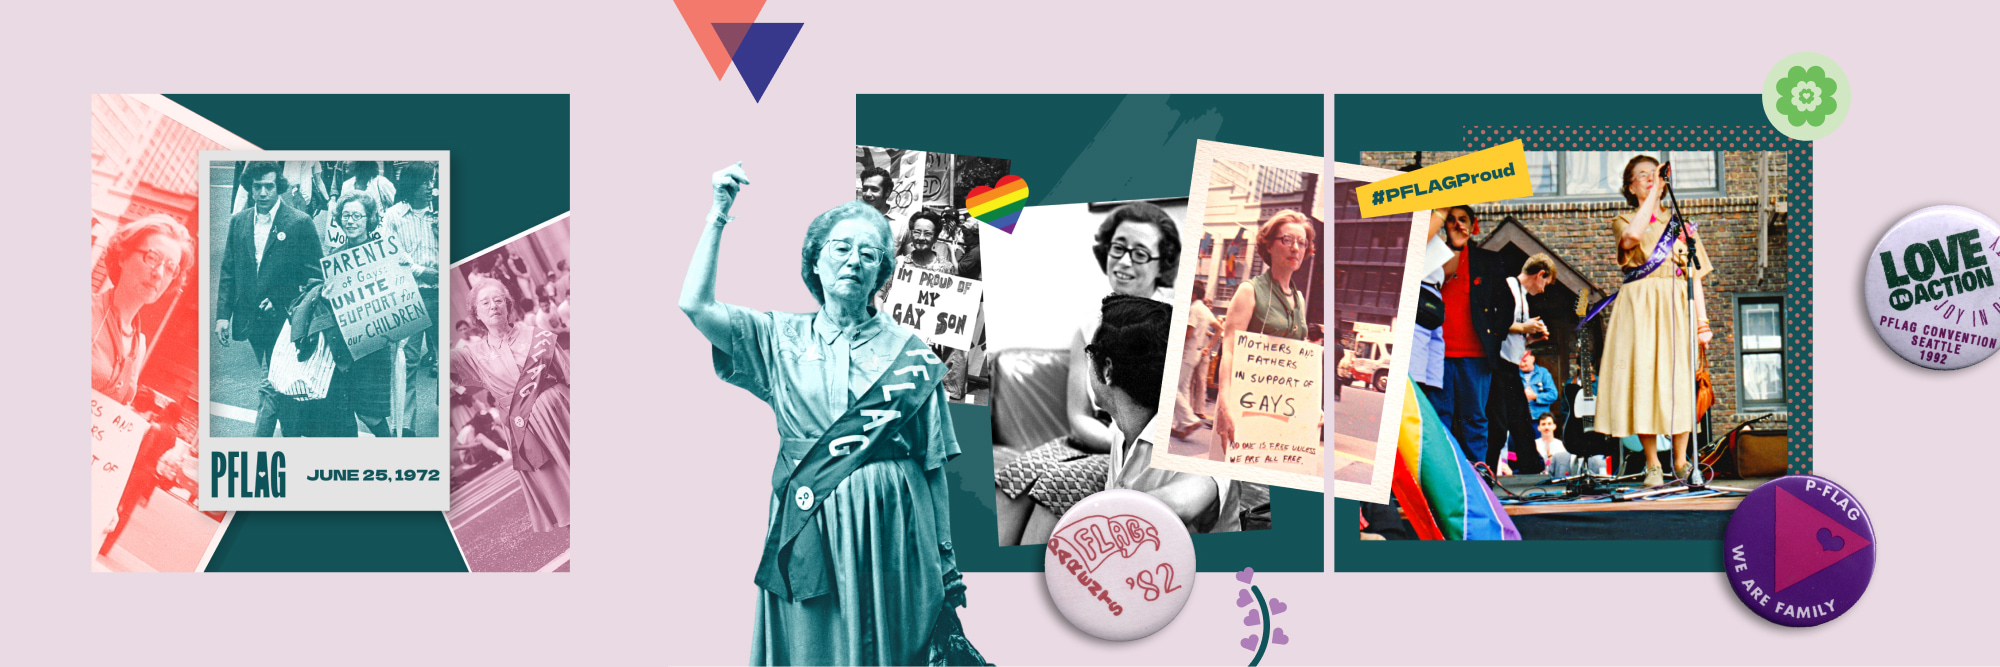 PFLAG Instagram social post collage featuring PFLAG's founder Jeanne and historic pins/buttons throughout PFLAG's history